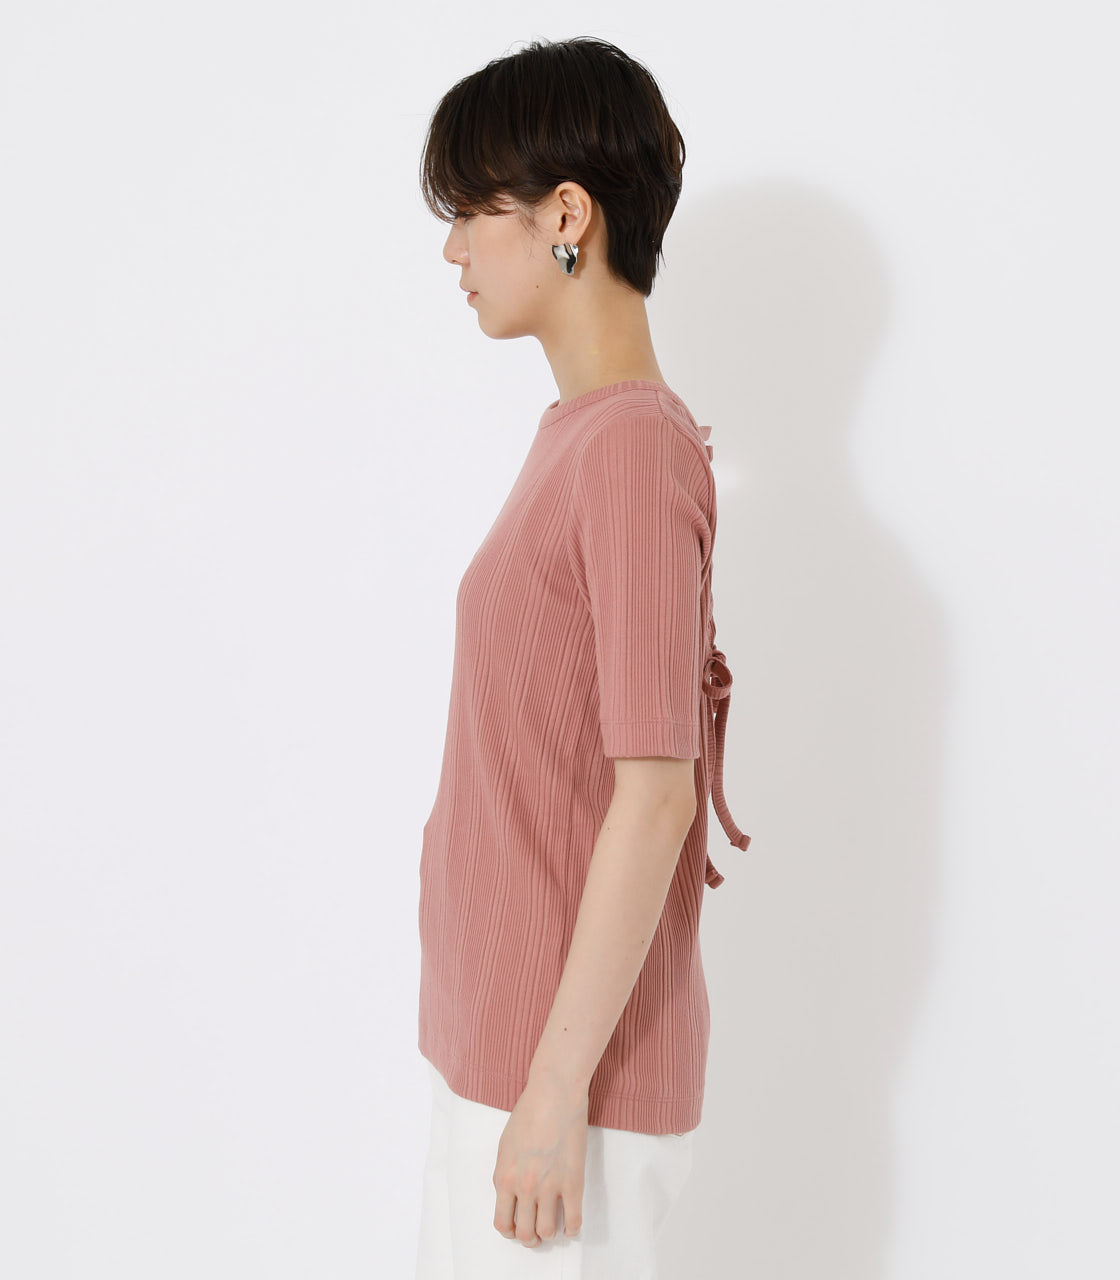 BACK LACE UP TOPS/バックレースアップトップス 詳細画像 PNK 5